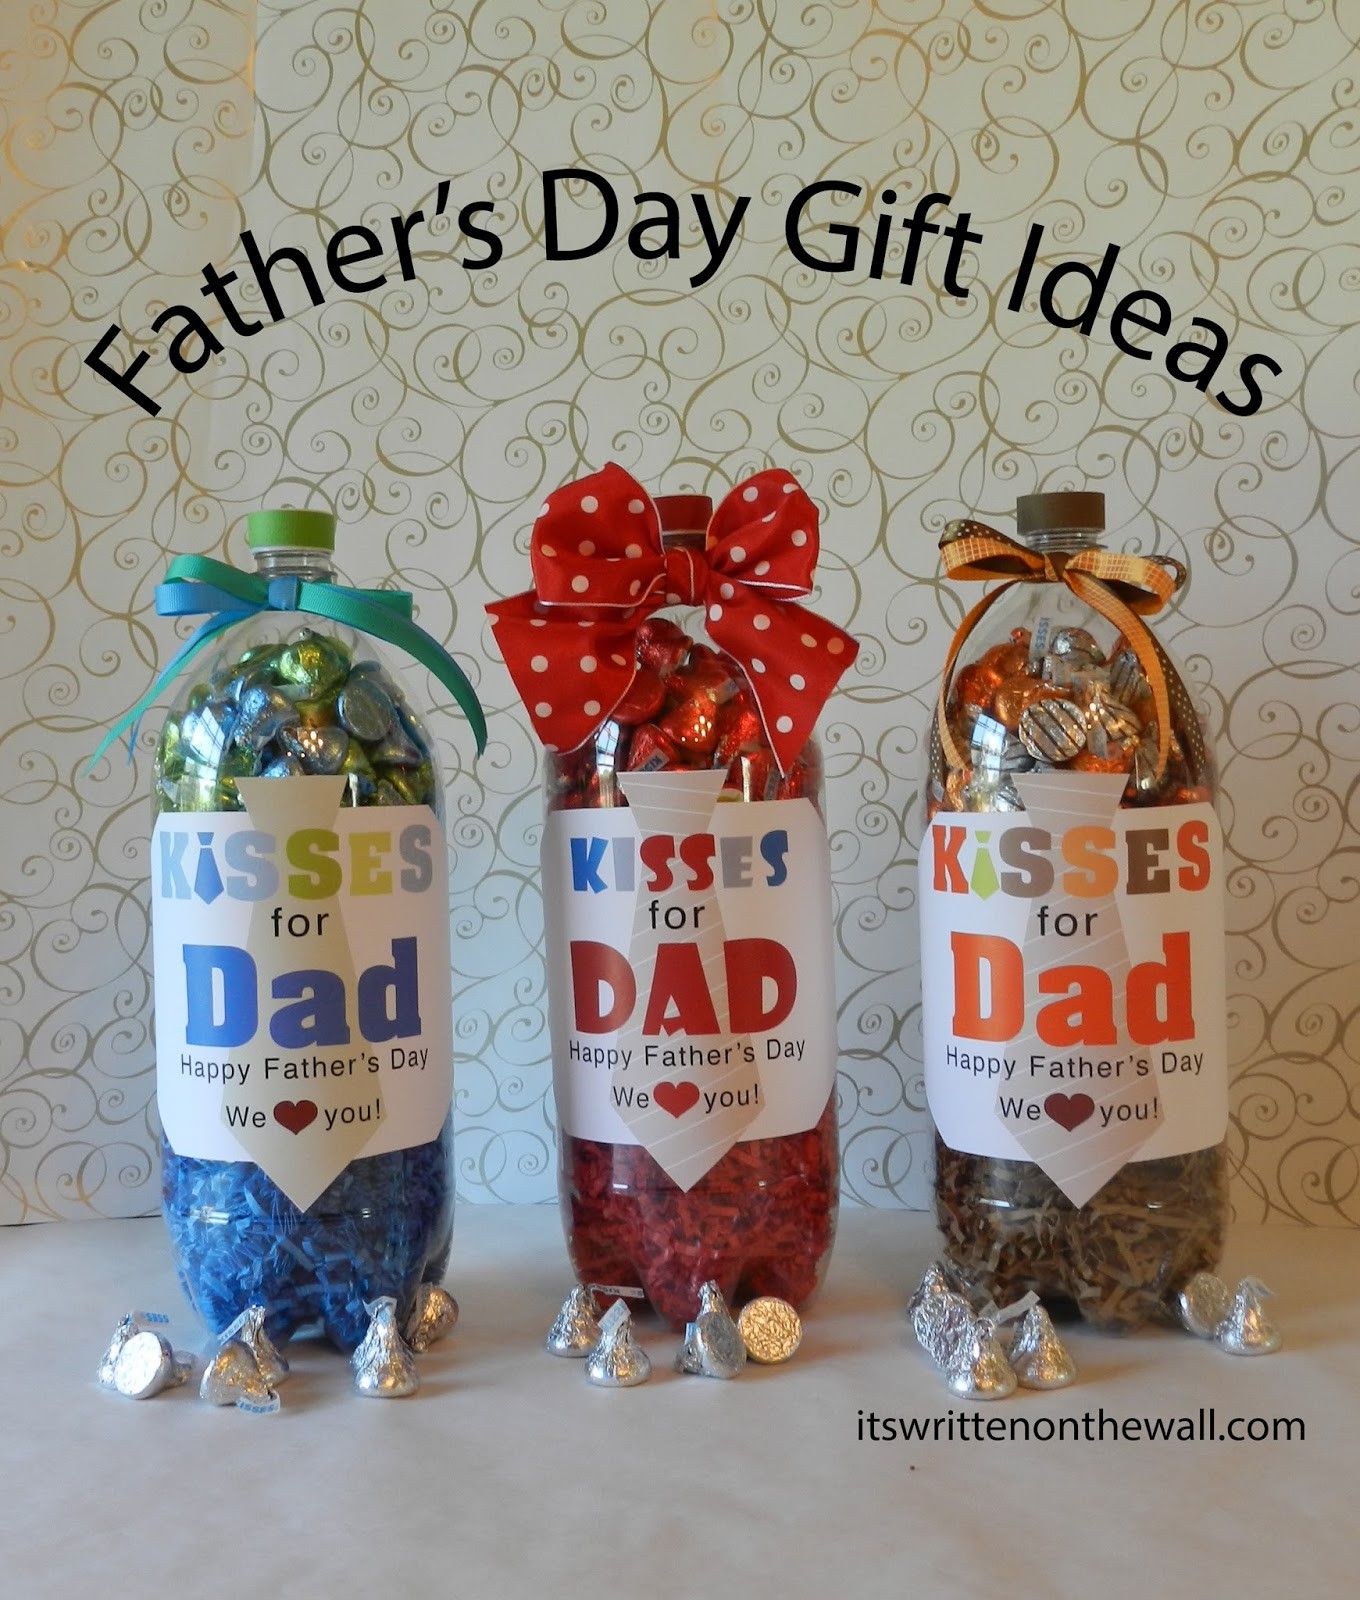 Ideas For Fathers Day Gift
 It s Written on the Wall Fathers Day Gift Ideas For the